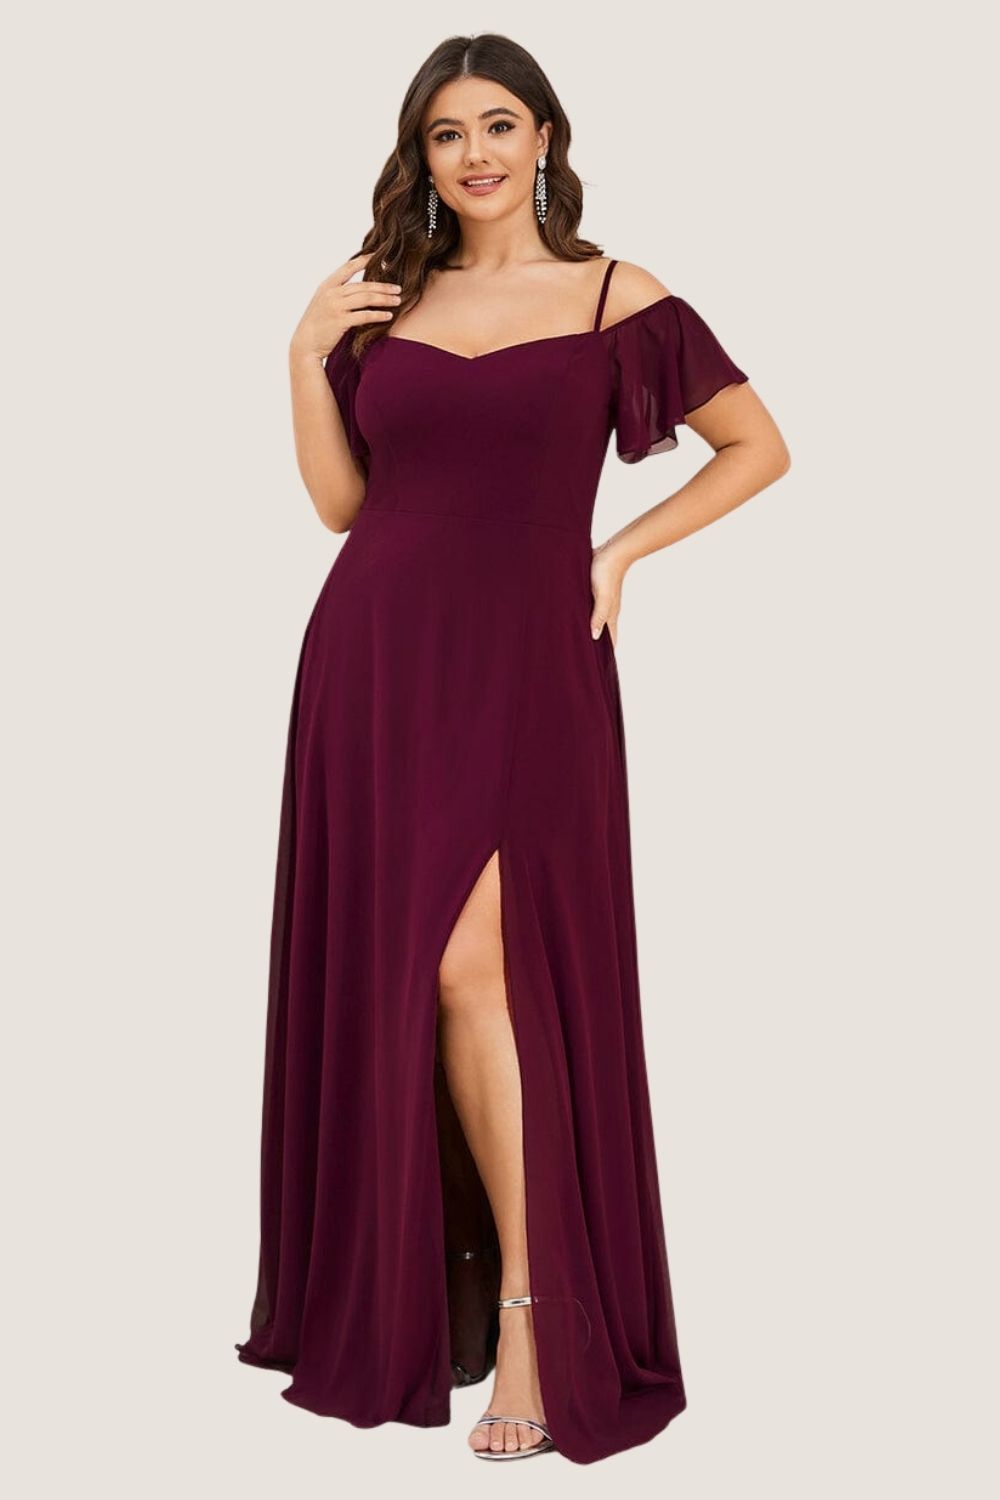 Try Before You Buy Amanda Bridesmaid Dress by Dressology